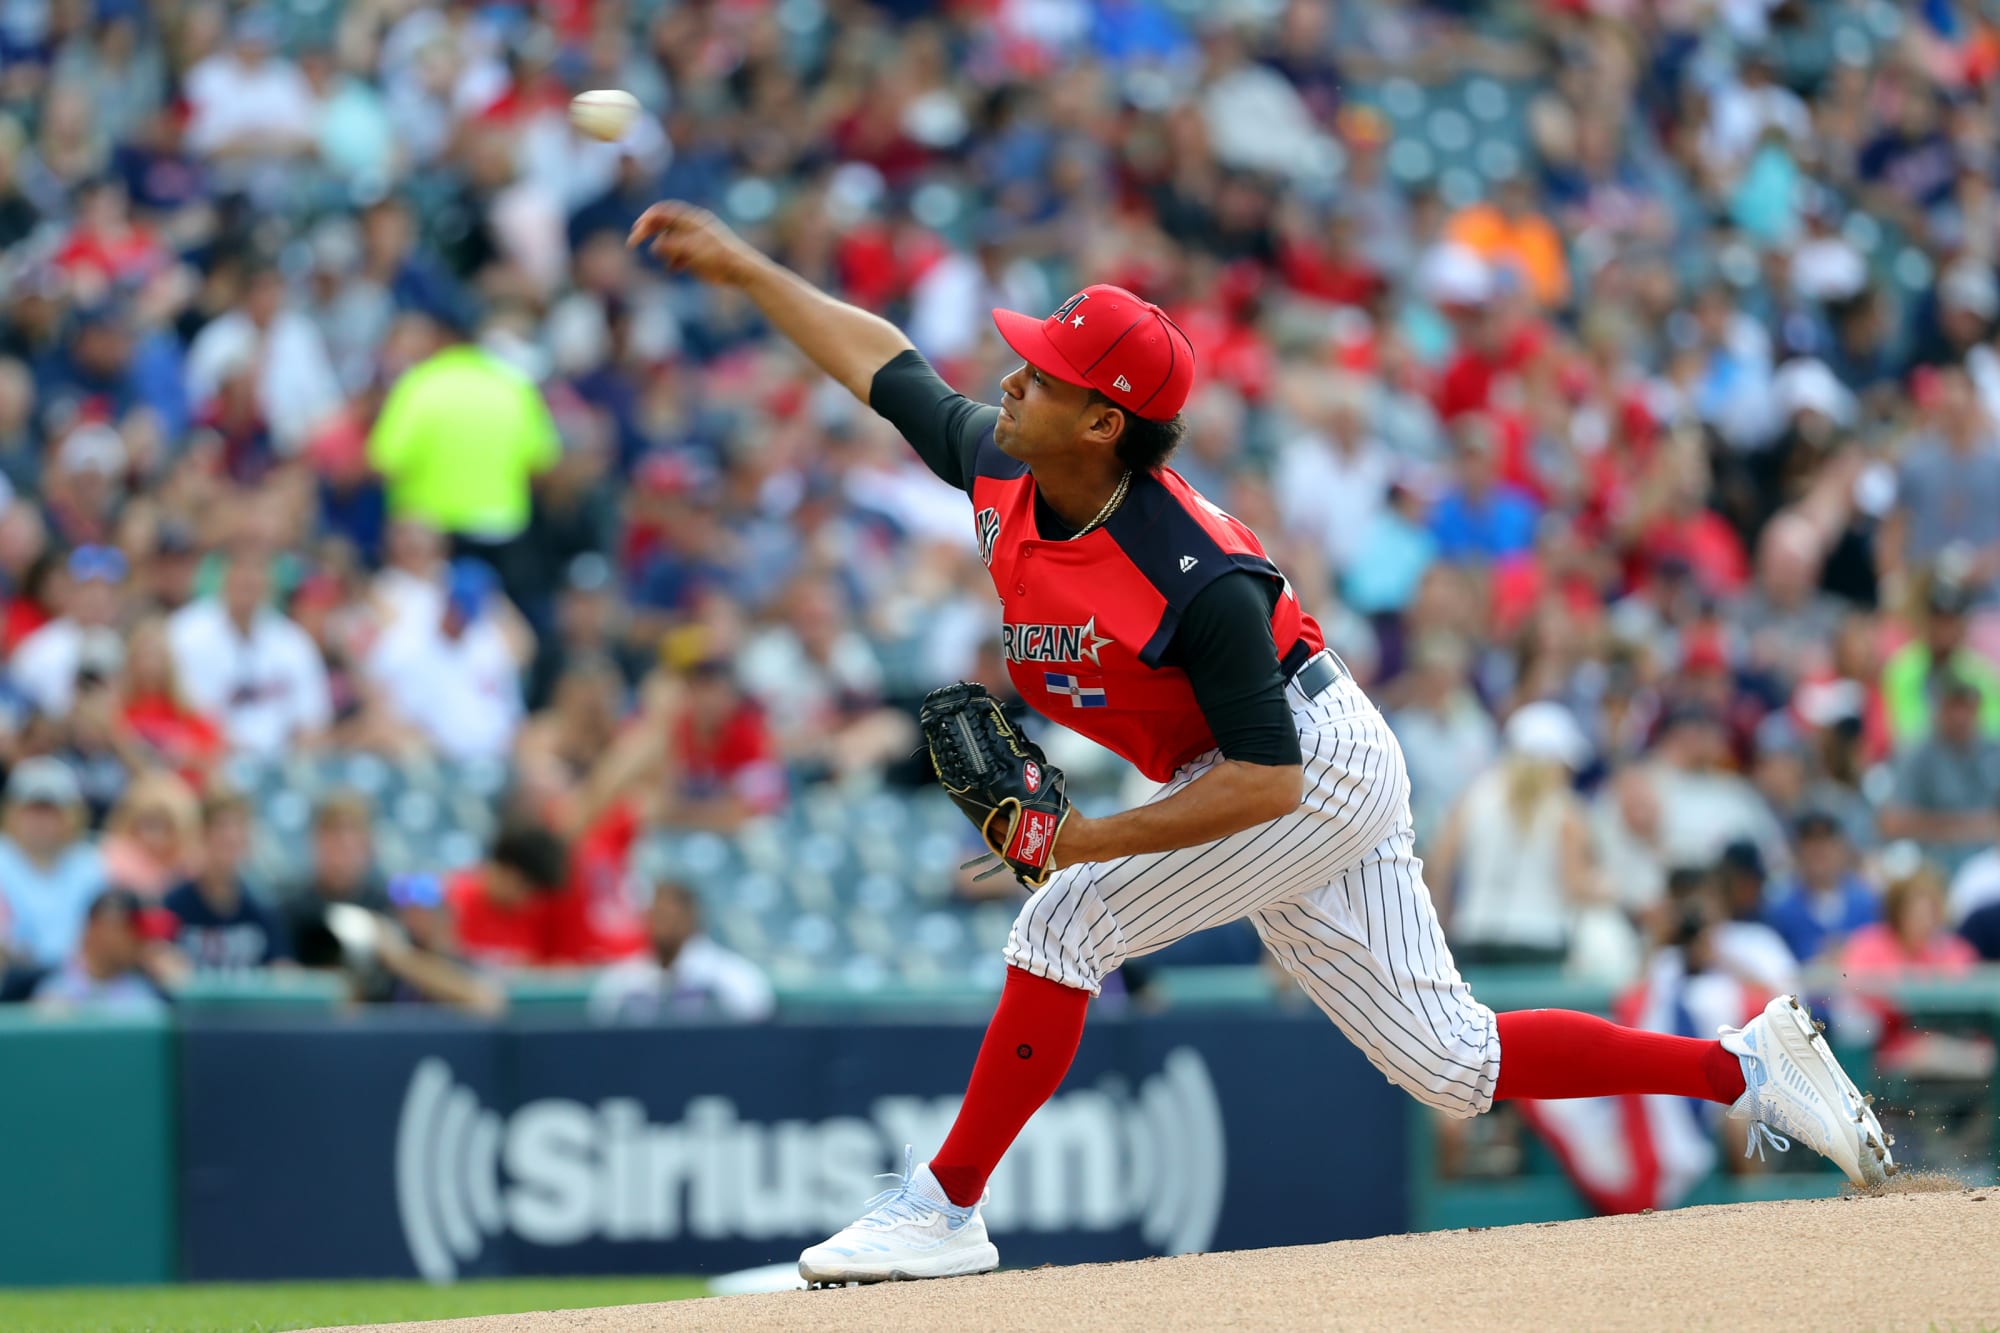 2019 MLB Playoffs: AL prospects that could make a difference - Page 5